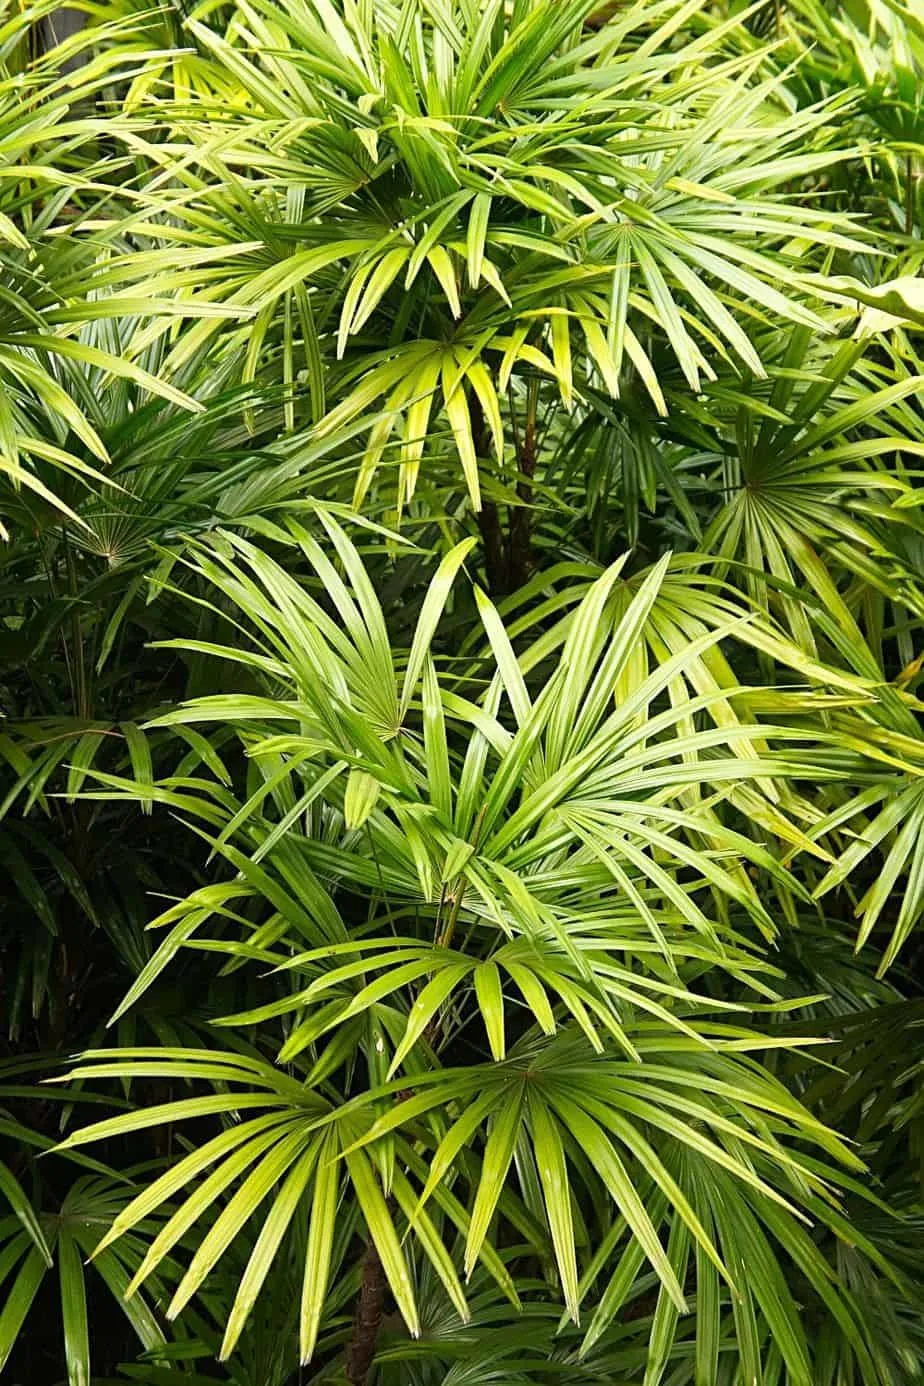 Lady Palm, with its long, slender leaves, is another great addition to beautify a southeast-facing window